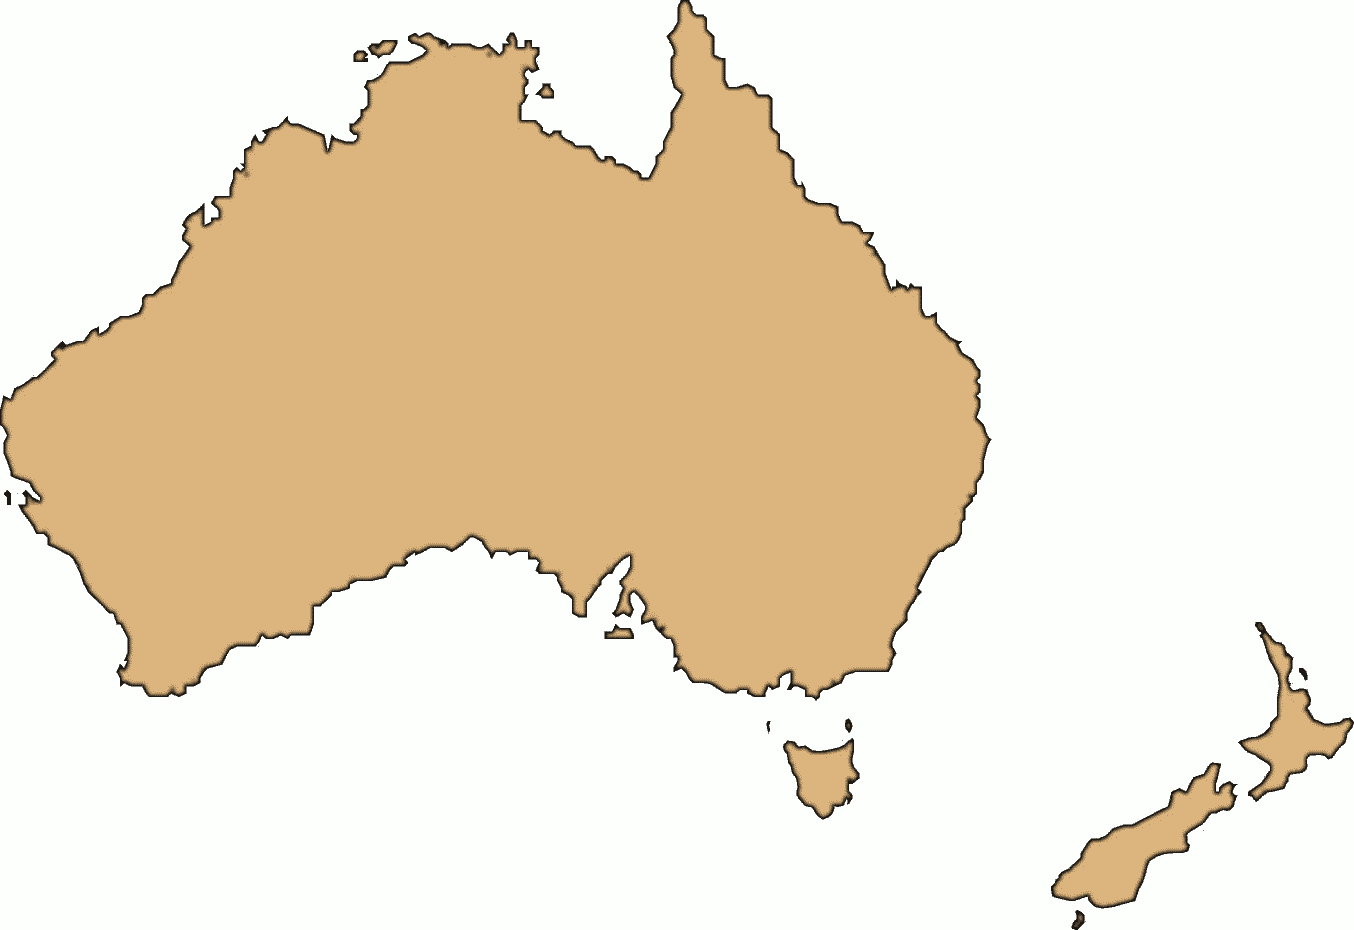 15 Outline Of Australia Free Cliparts That You Can Download To You